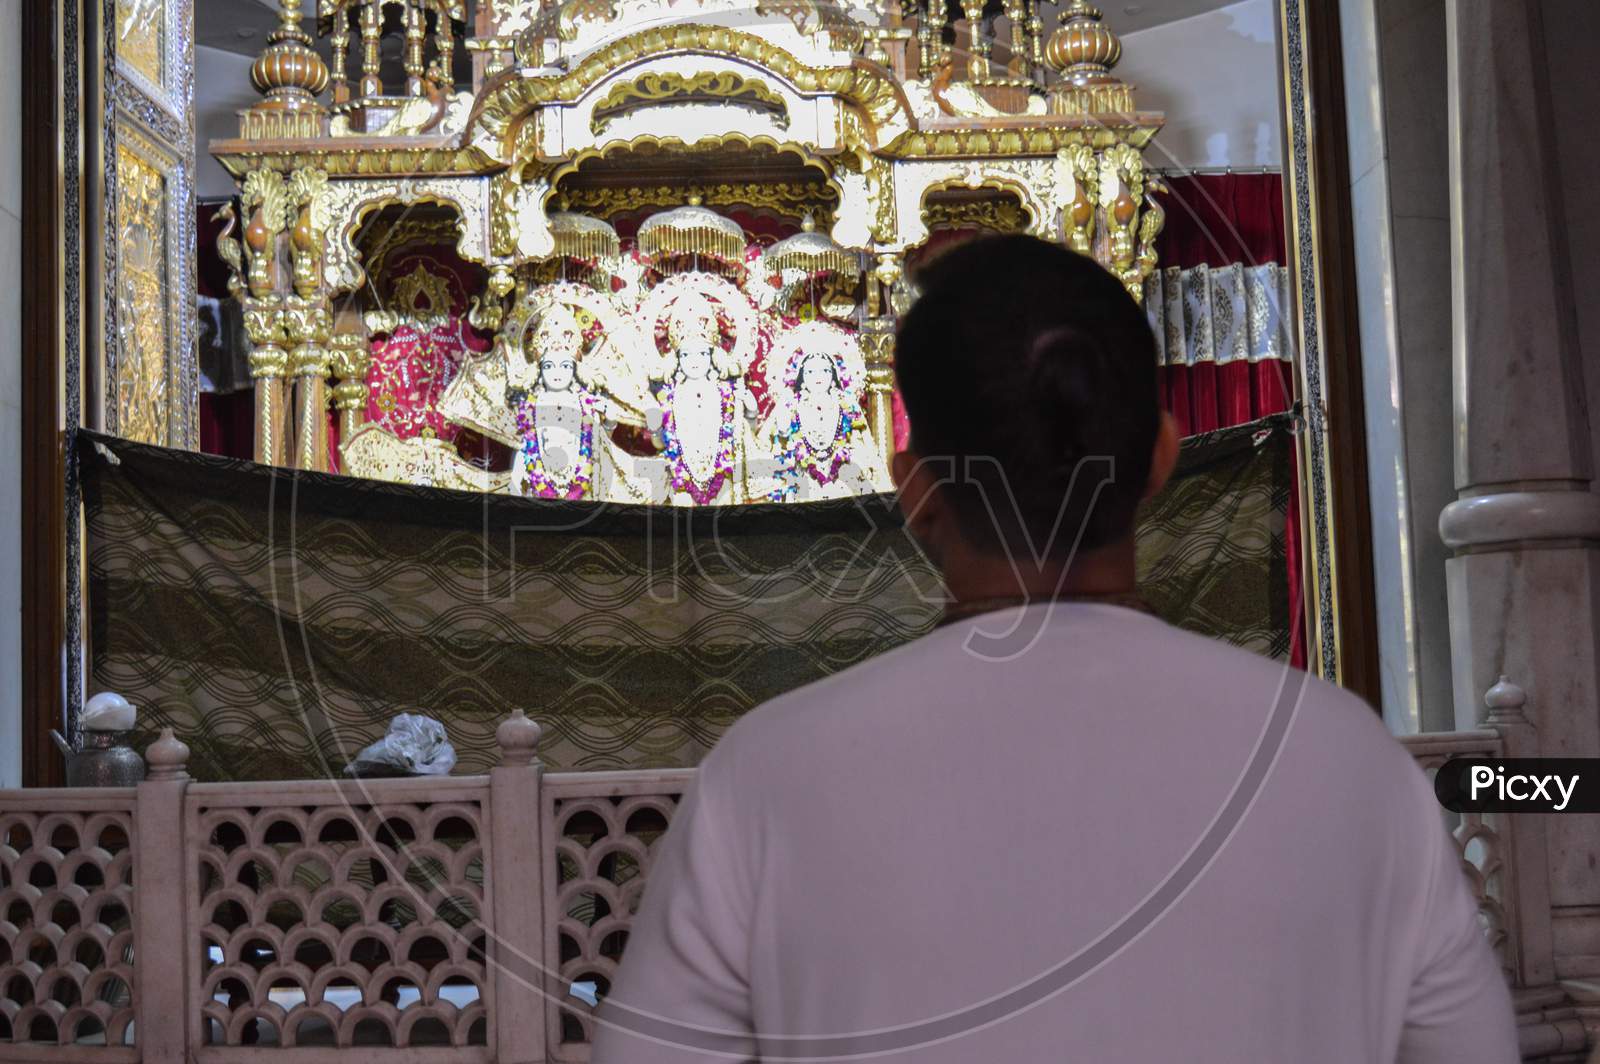 A Man Is Looking At God Lord Krishna And Praying For Good Wealth And Health On The Indian Festival Of Lord Krishna Birth Ceremony( Janmastami) At Iskcon Temple New Delhi, India.